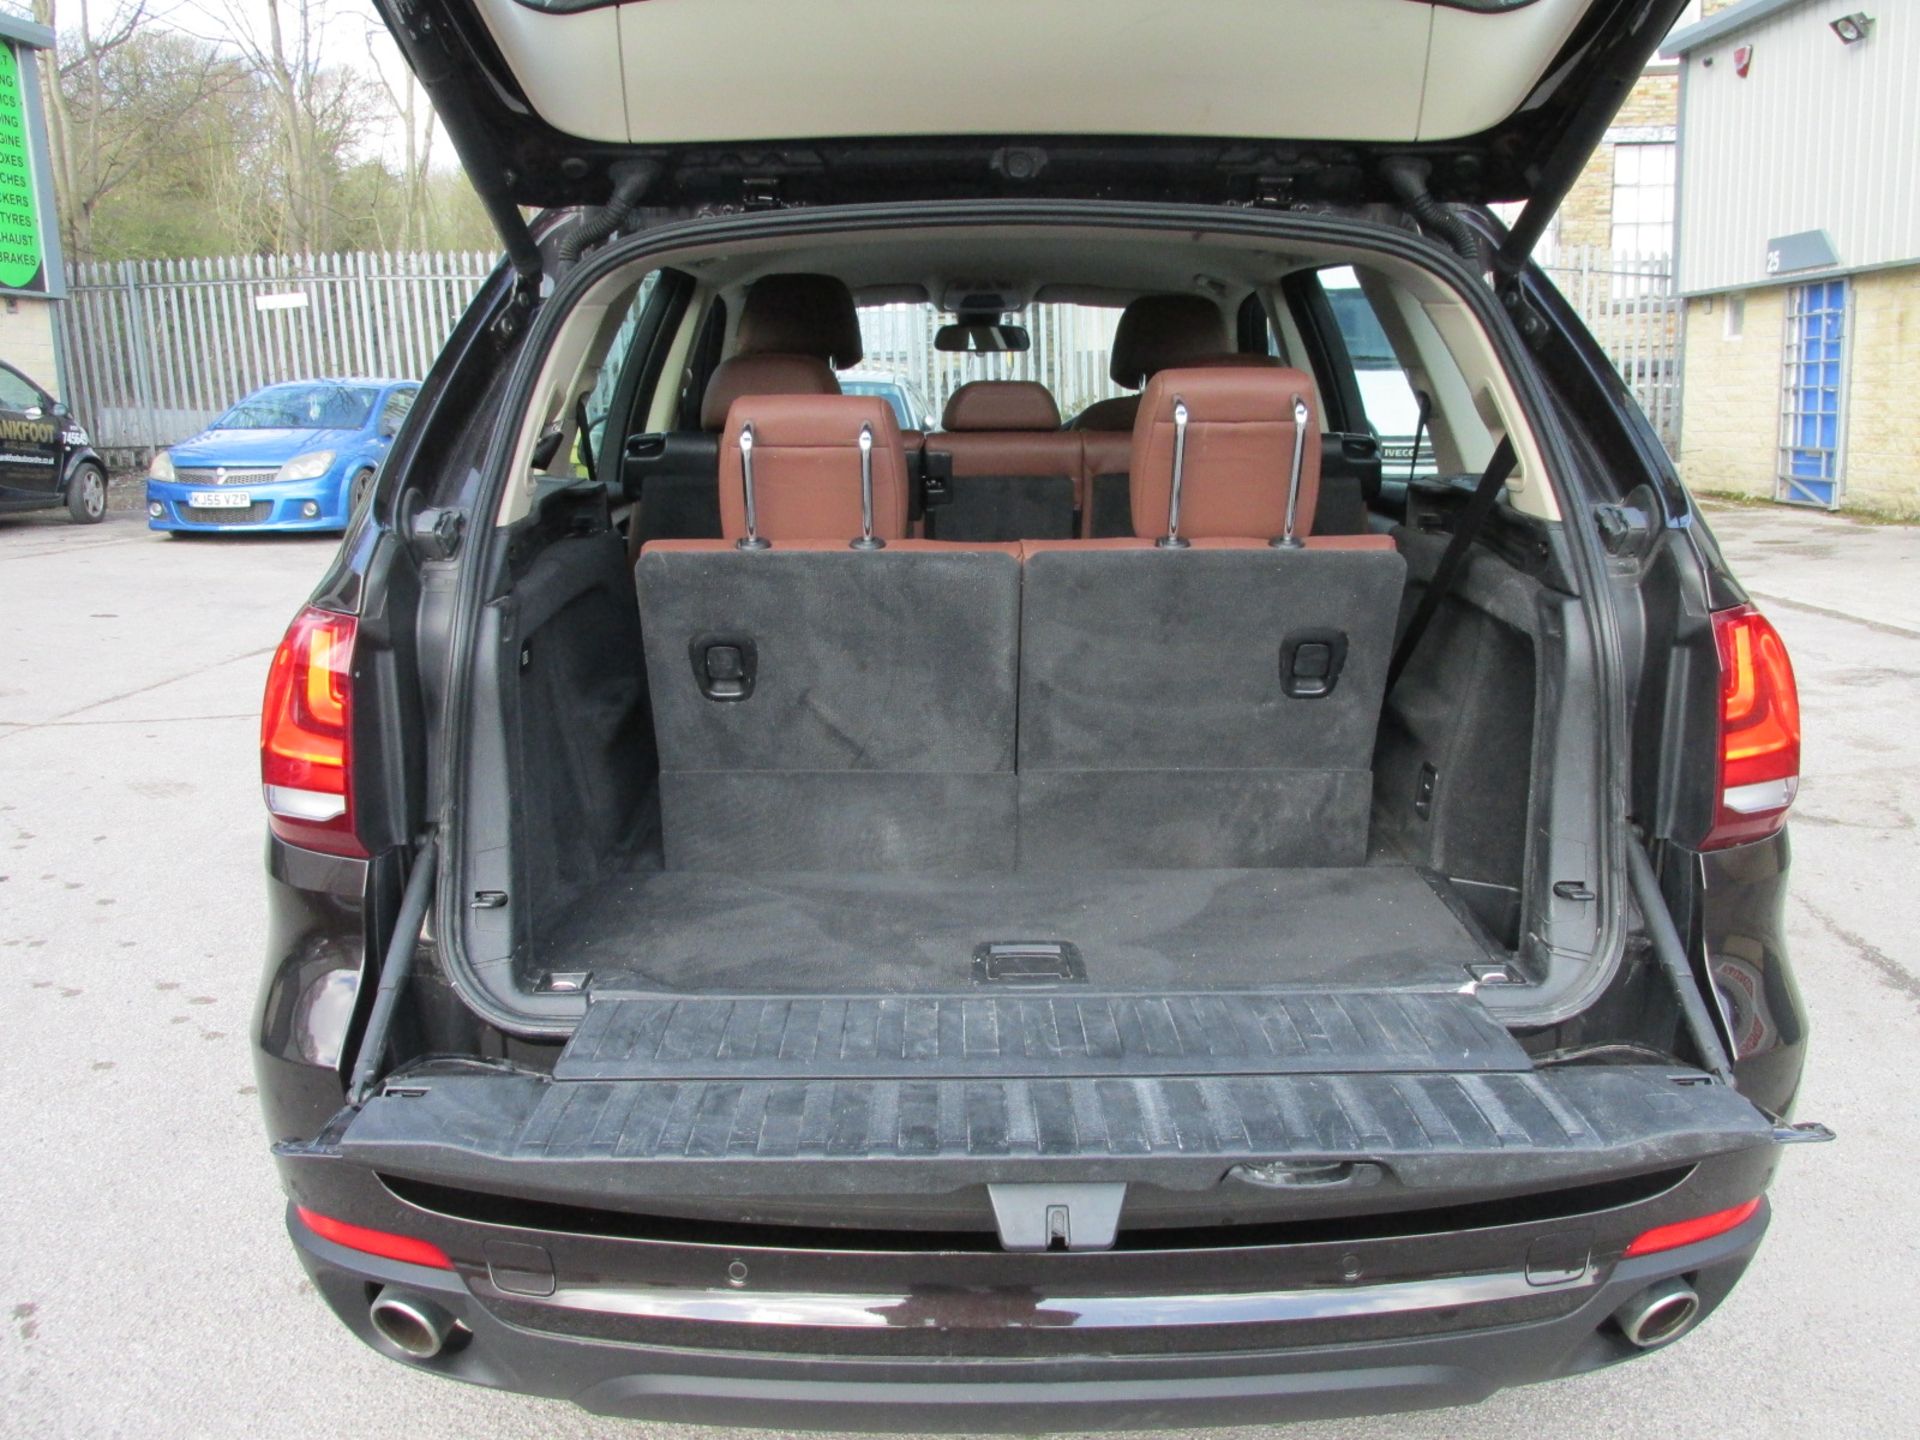 FG64 WOU - BMW X5 3.0DSE Individual 7 Seater - No VAT on hammer, Full BMW Service History. - Image 12 of 20